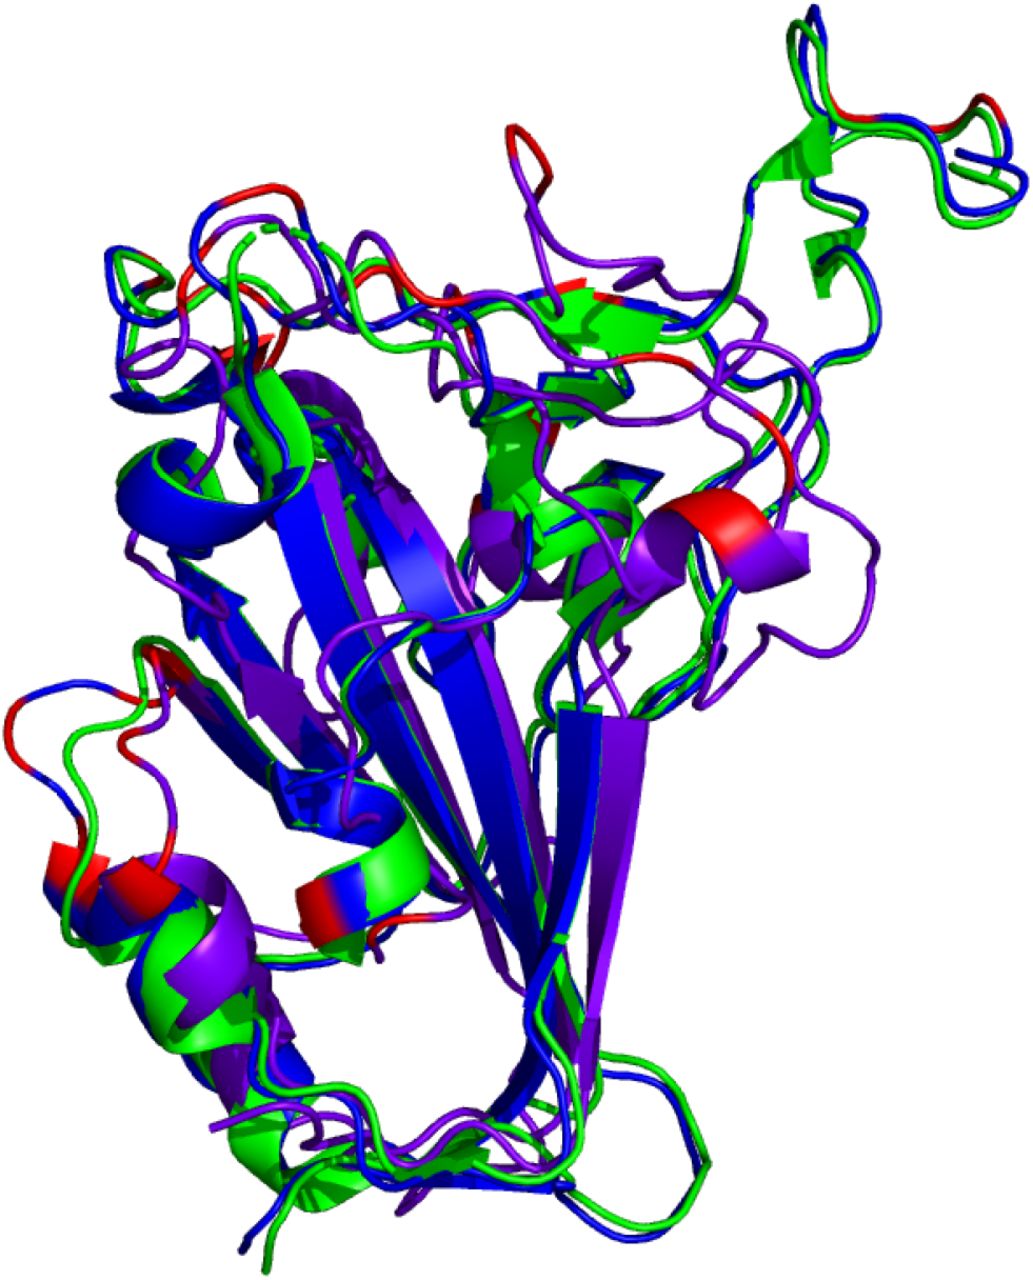 Comparison of reference RBD structure (PDB: 6XC2, shown in green) and the predicted Omicron (B.1.1.529) RBD structures (AlphaFold2 shown in blue, RoseTTAFold shown in purple). Mutated residues are highlighted in red.